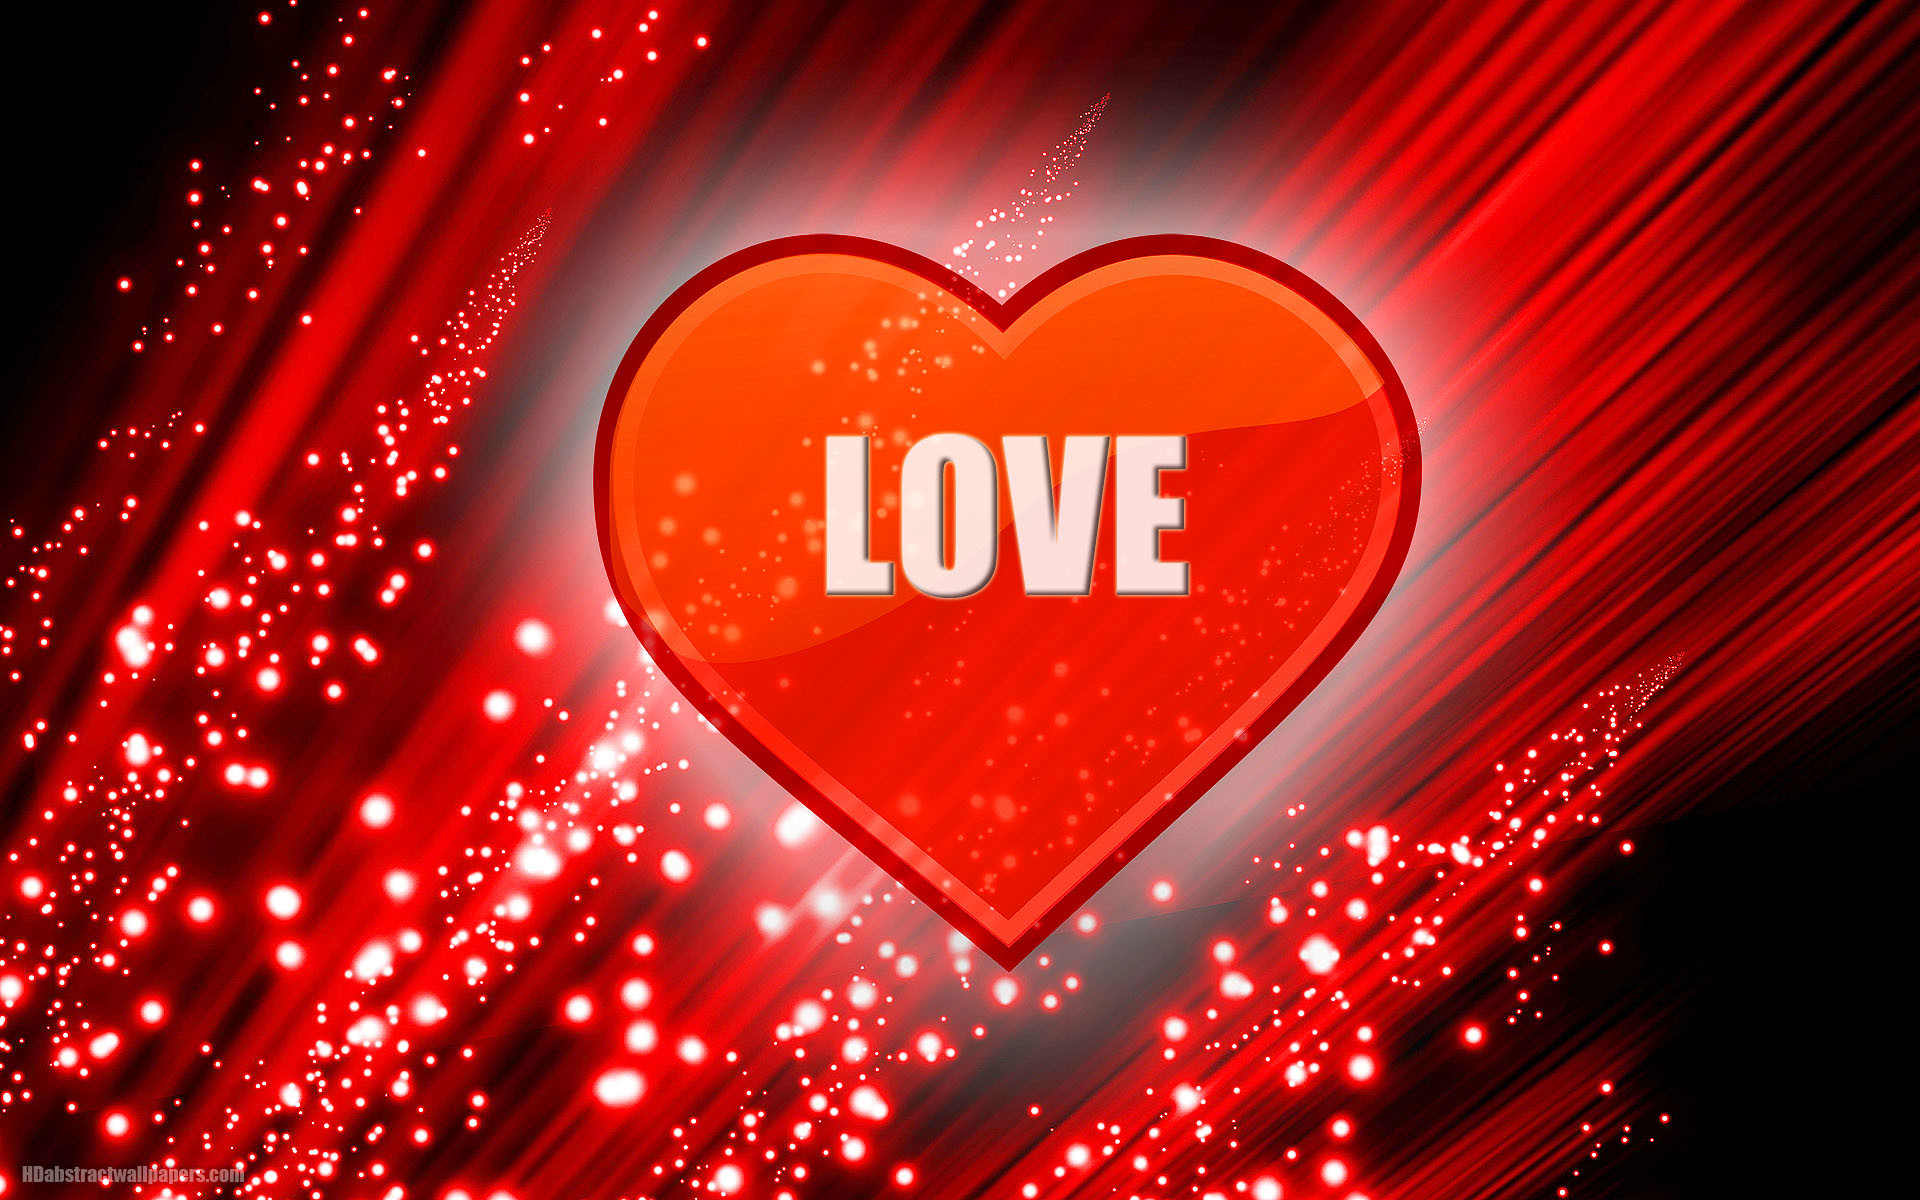 1920x1200 Red abstract wallpaper with big heart and text love